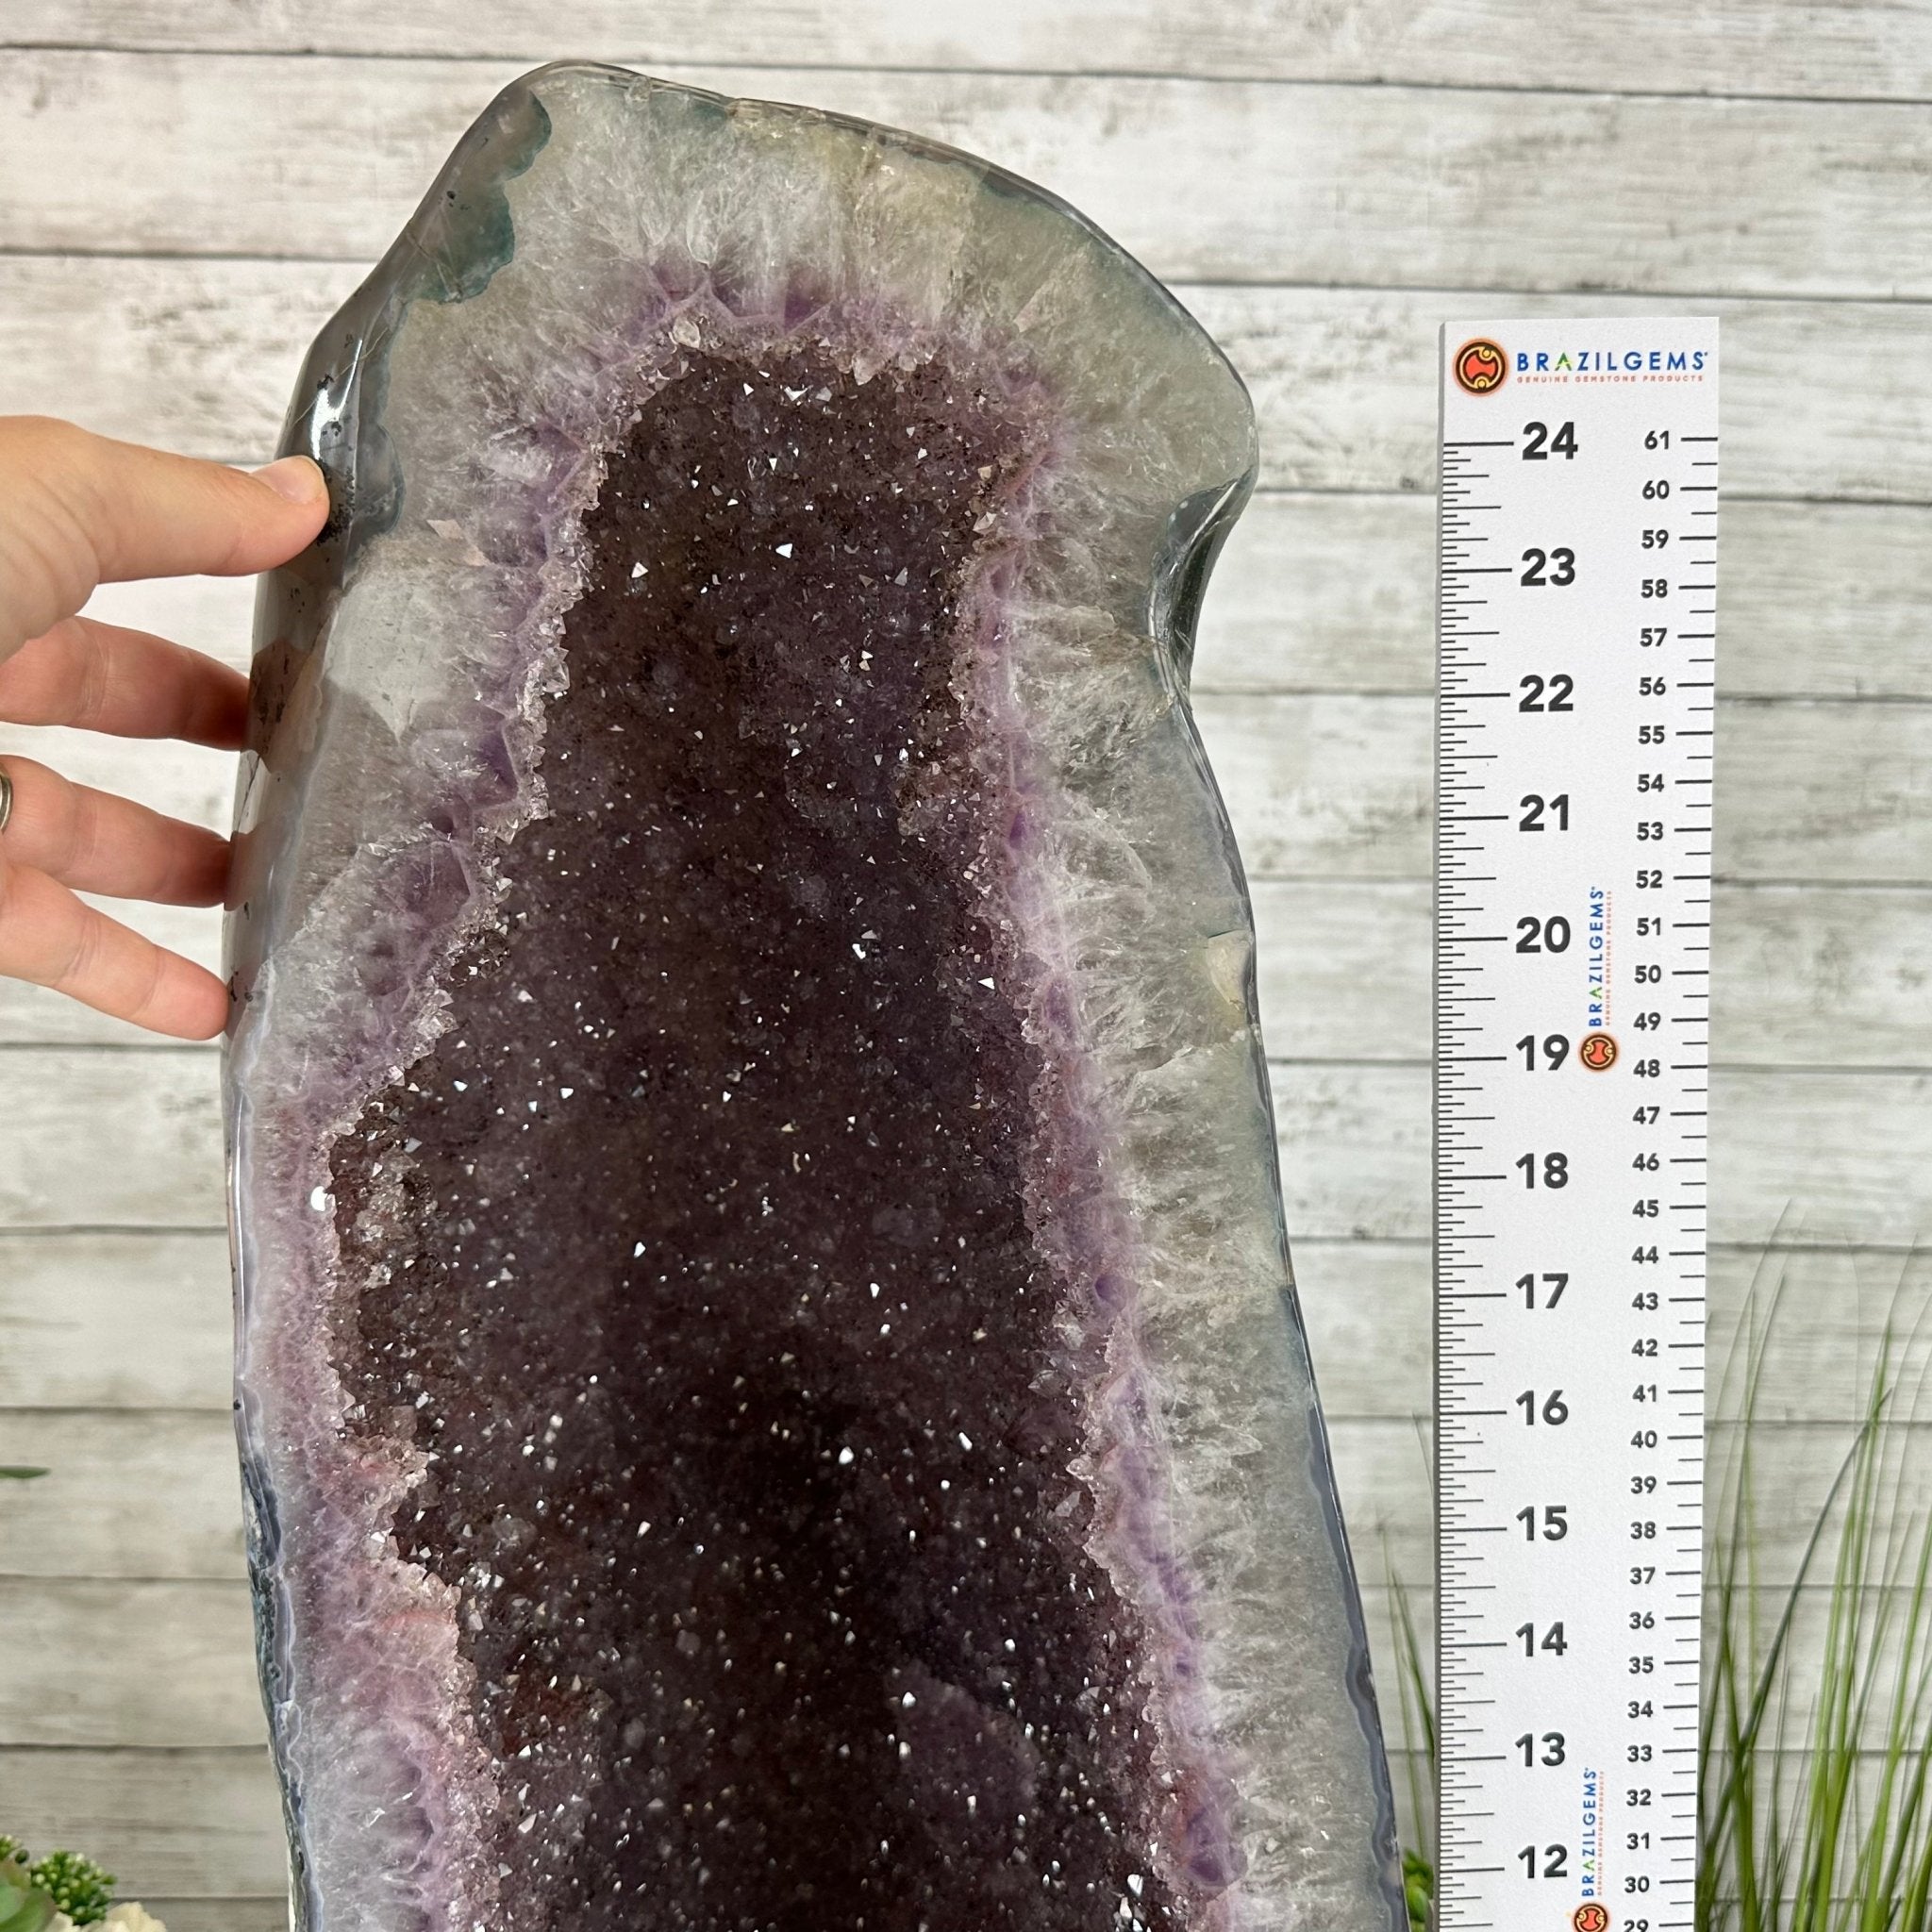 Extra Quality Polished Brazilian Amethyst Cathedral, 84.8 lbs & 26.2" tall Model #5602-0164 by Brazil Gems - Brazil GemsBrazil GemsExtra Quality Polished Brazilian Amethyst Cathedral, 84.8 lbs & 26.2" tall Model #5602-0164 by Brazil GemsPolished Cathedrals5602-0164